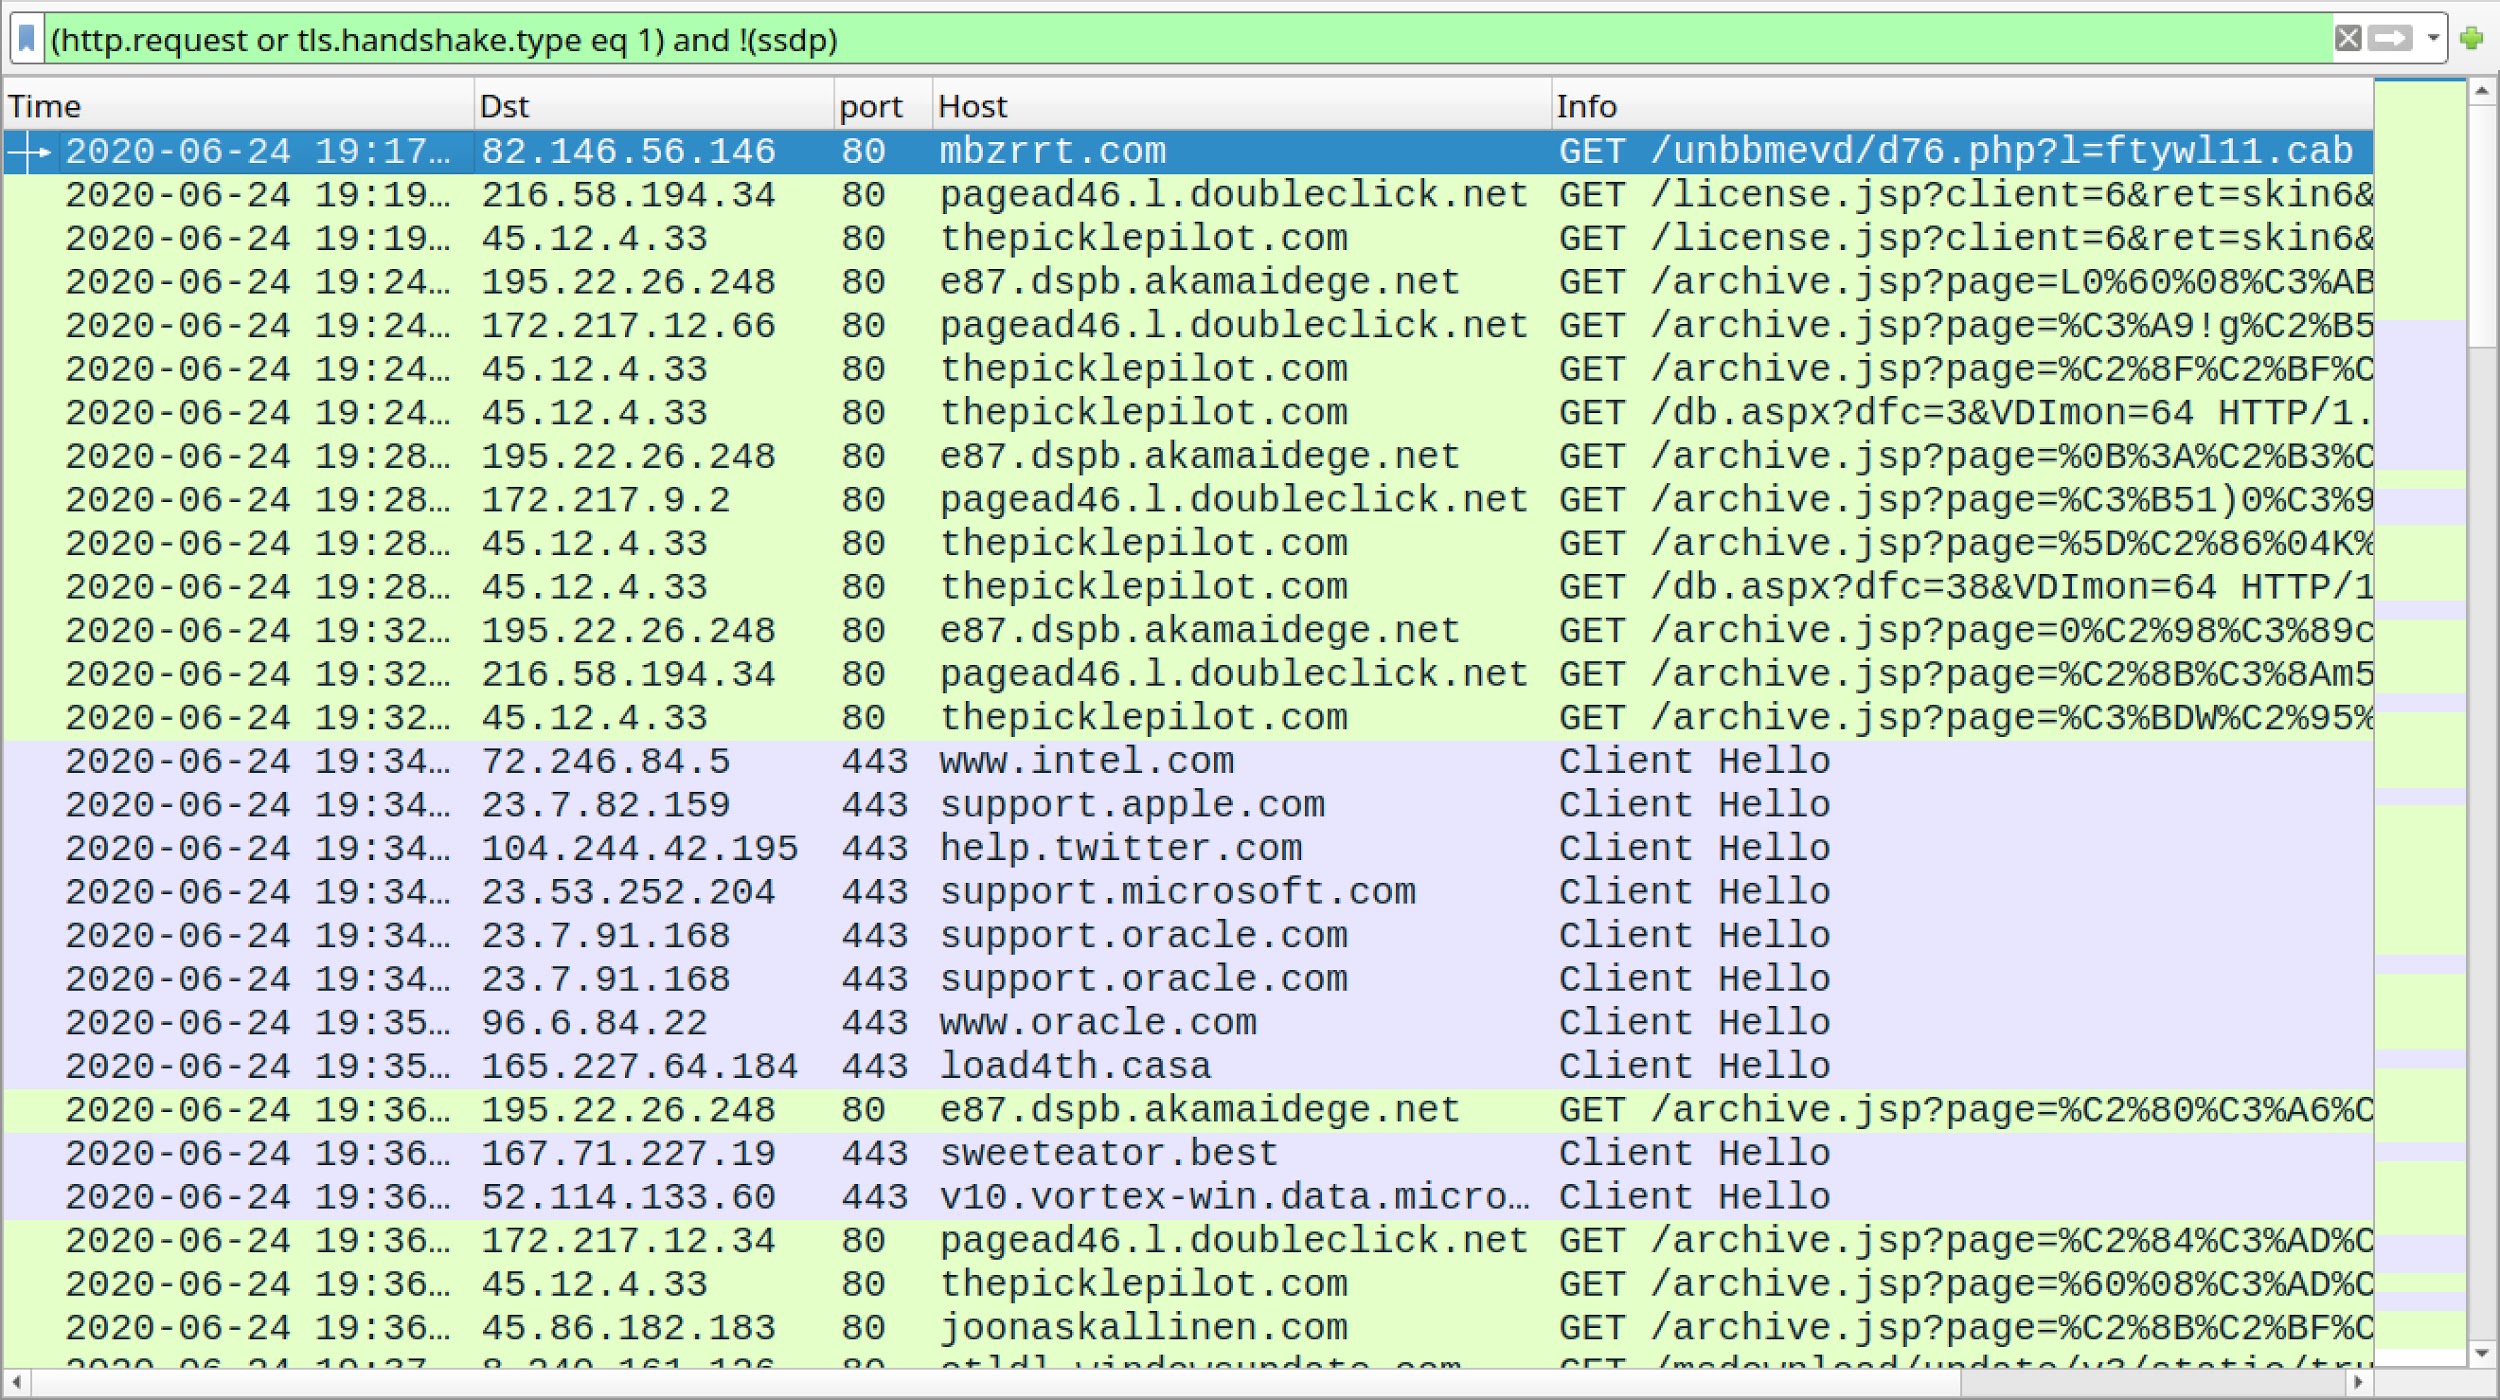 This shows a log of traffic from a Valak infection with IcedID as the follow-up malware.